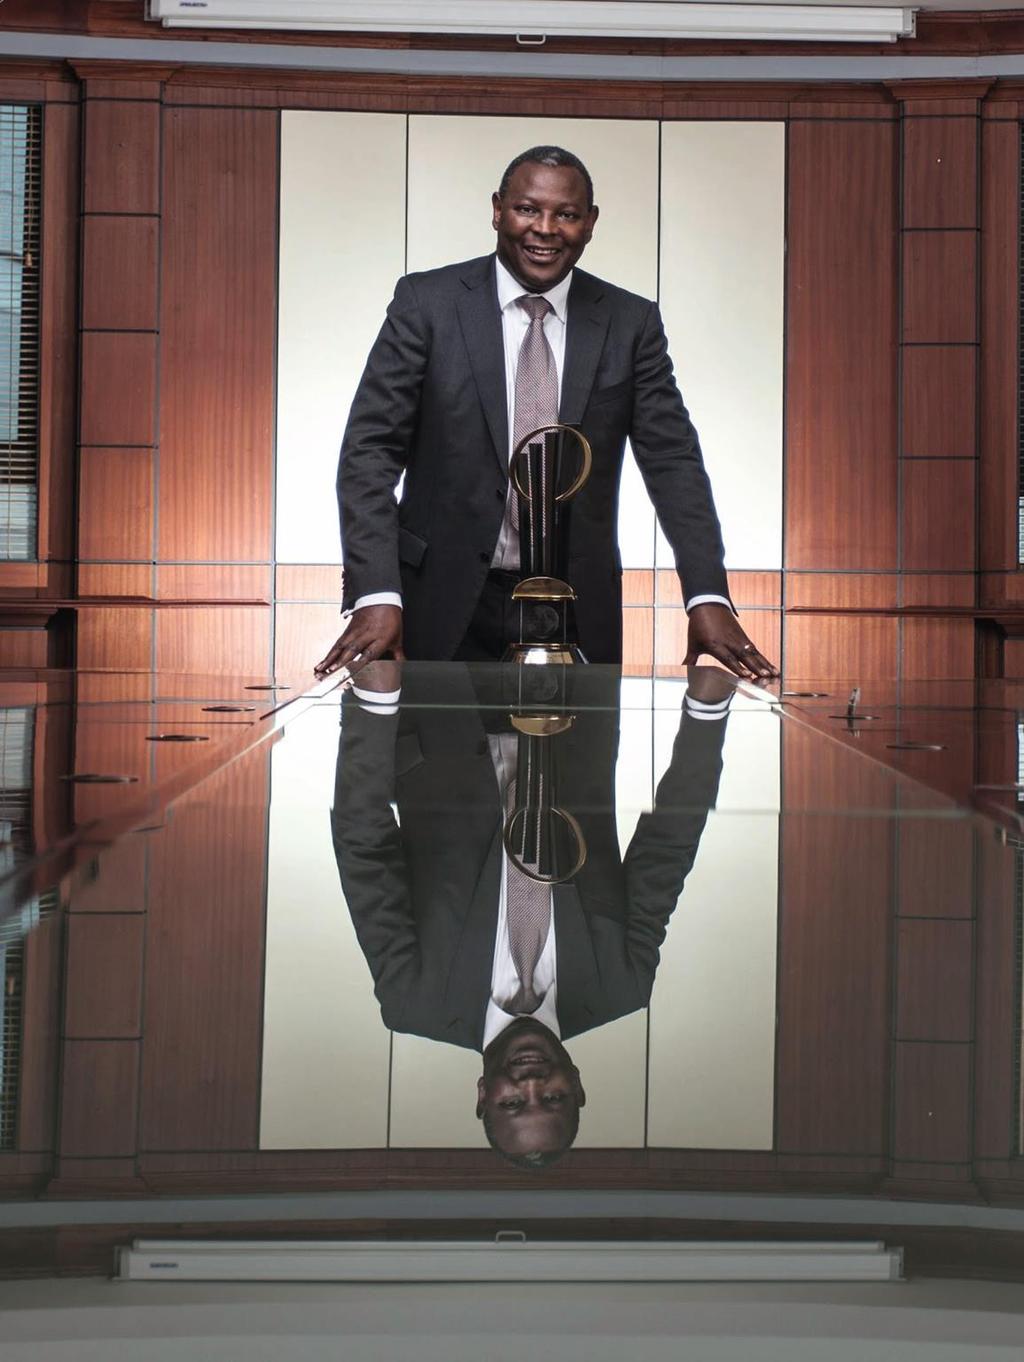 JAMES MWANGI, Group MD & Group CEO, Equity Group Holdings Ltd Forbes Africa Print Rate Card (USD)* Number of Issues 1 3 6 12 Opening Double Page (DPS) 13,500 13,025 12,162 10,437 Outside Back Cover